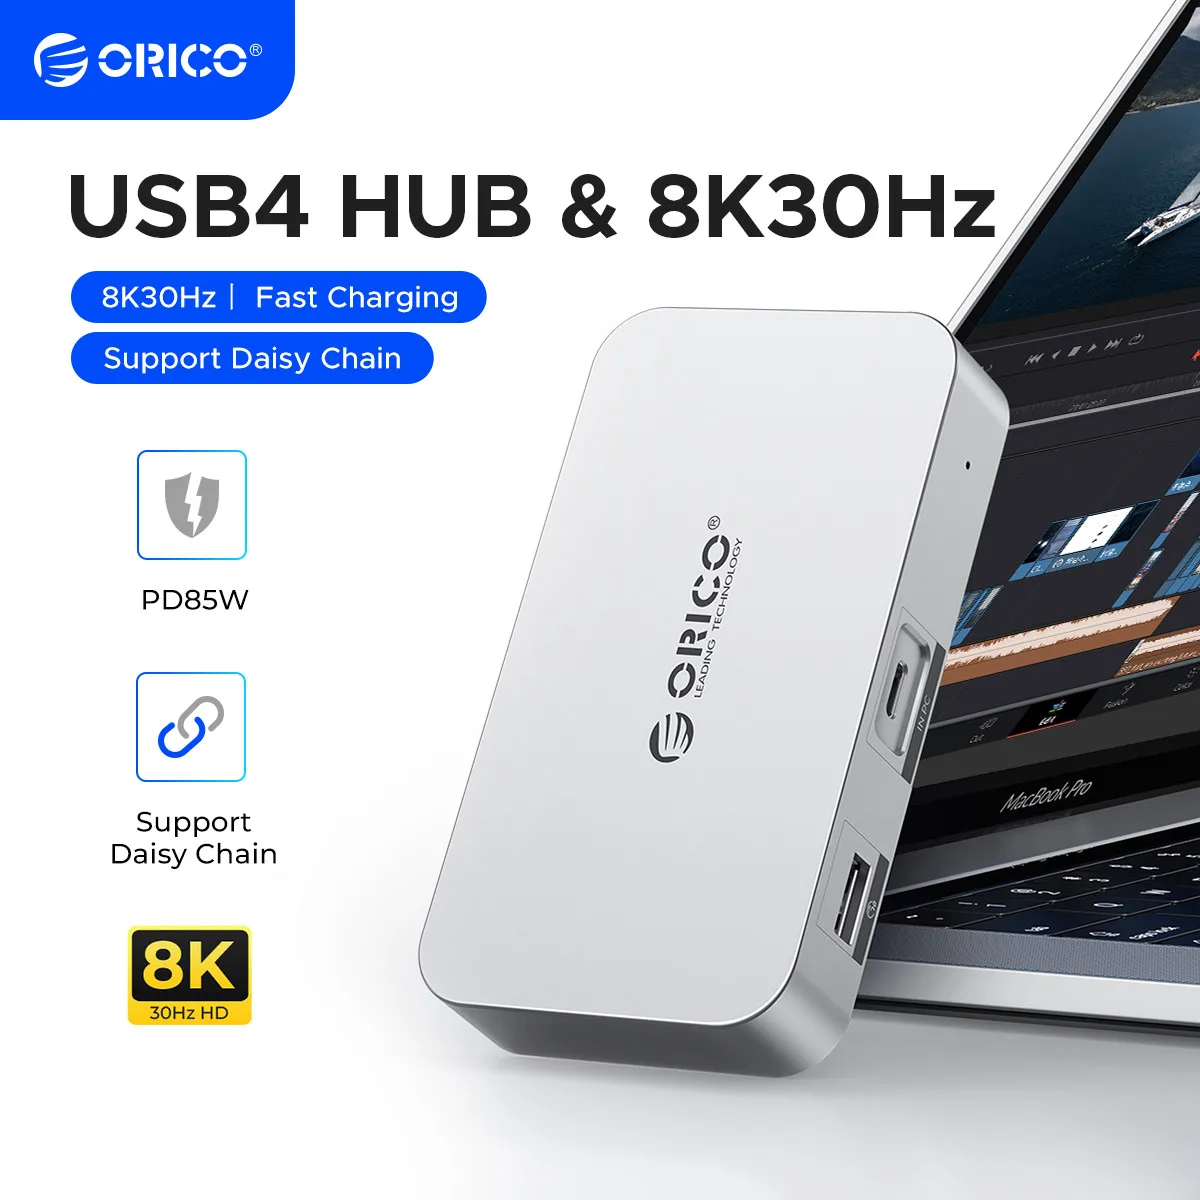 

ORICO USB4 HUB 40G USB C HUB PD85W 8K@30Hz 5K@60Hz 4K@60Hz Display Support Daisy Chain Expand for MacBook Pro Mac OS Windows